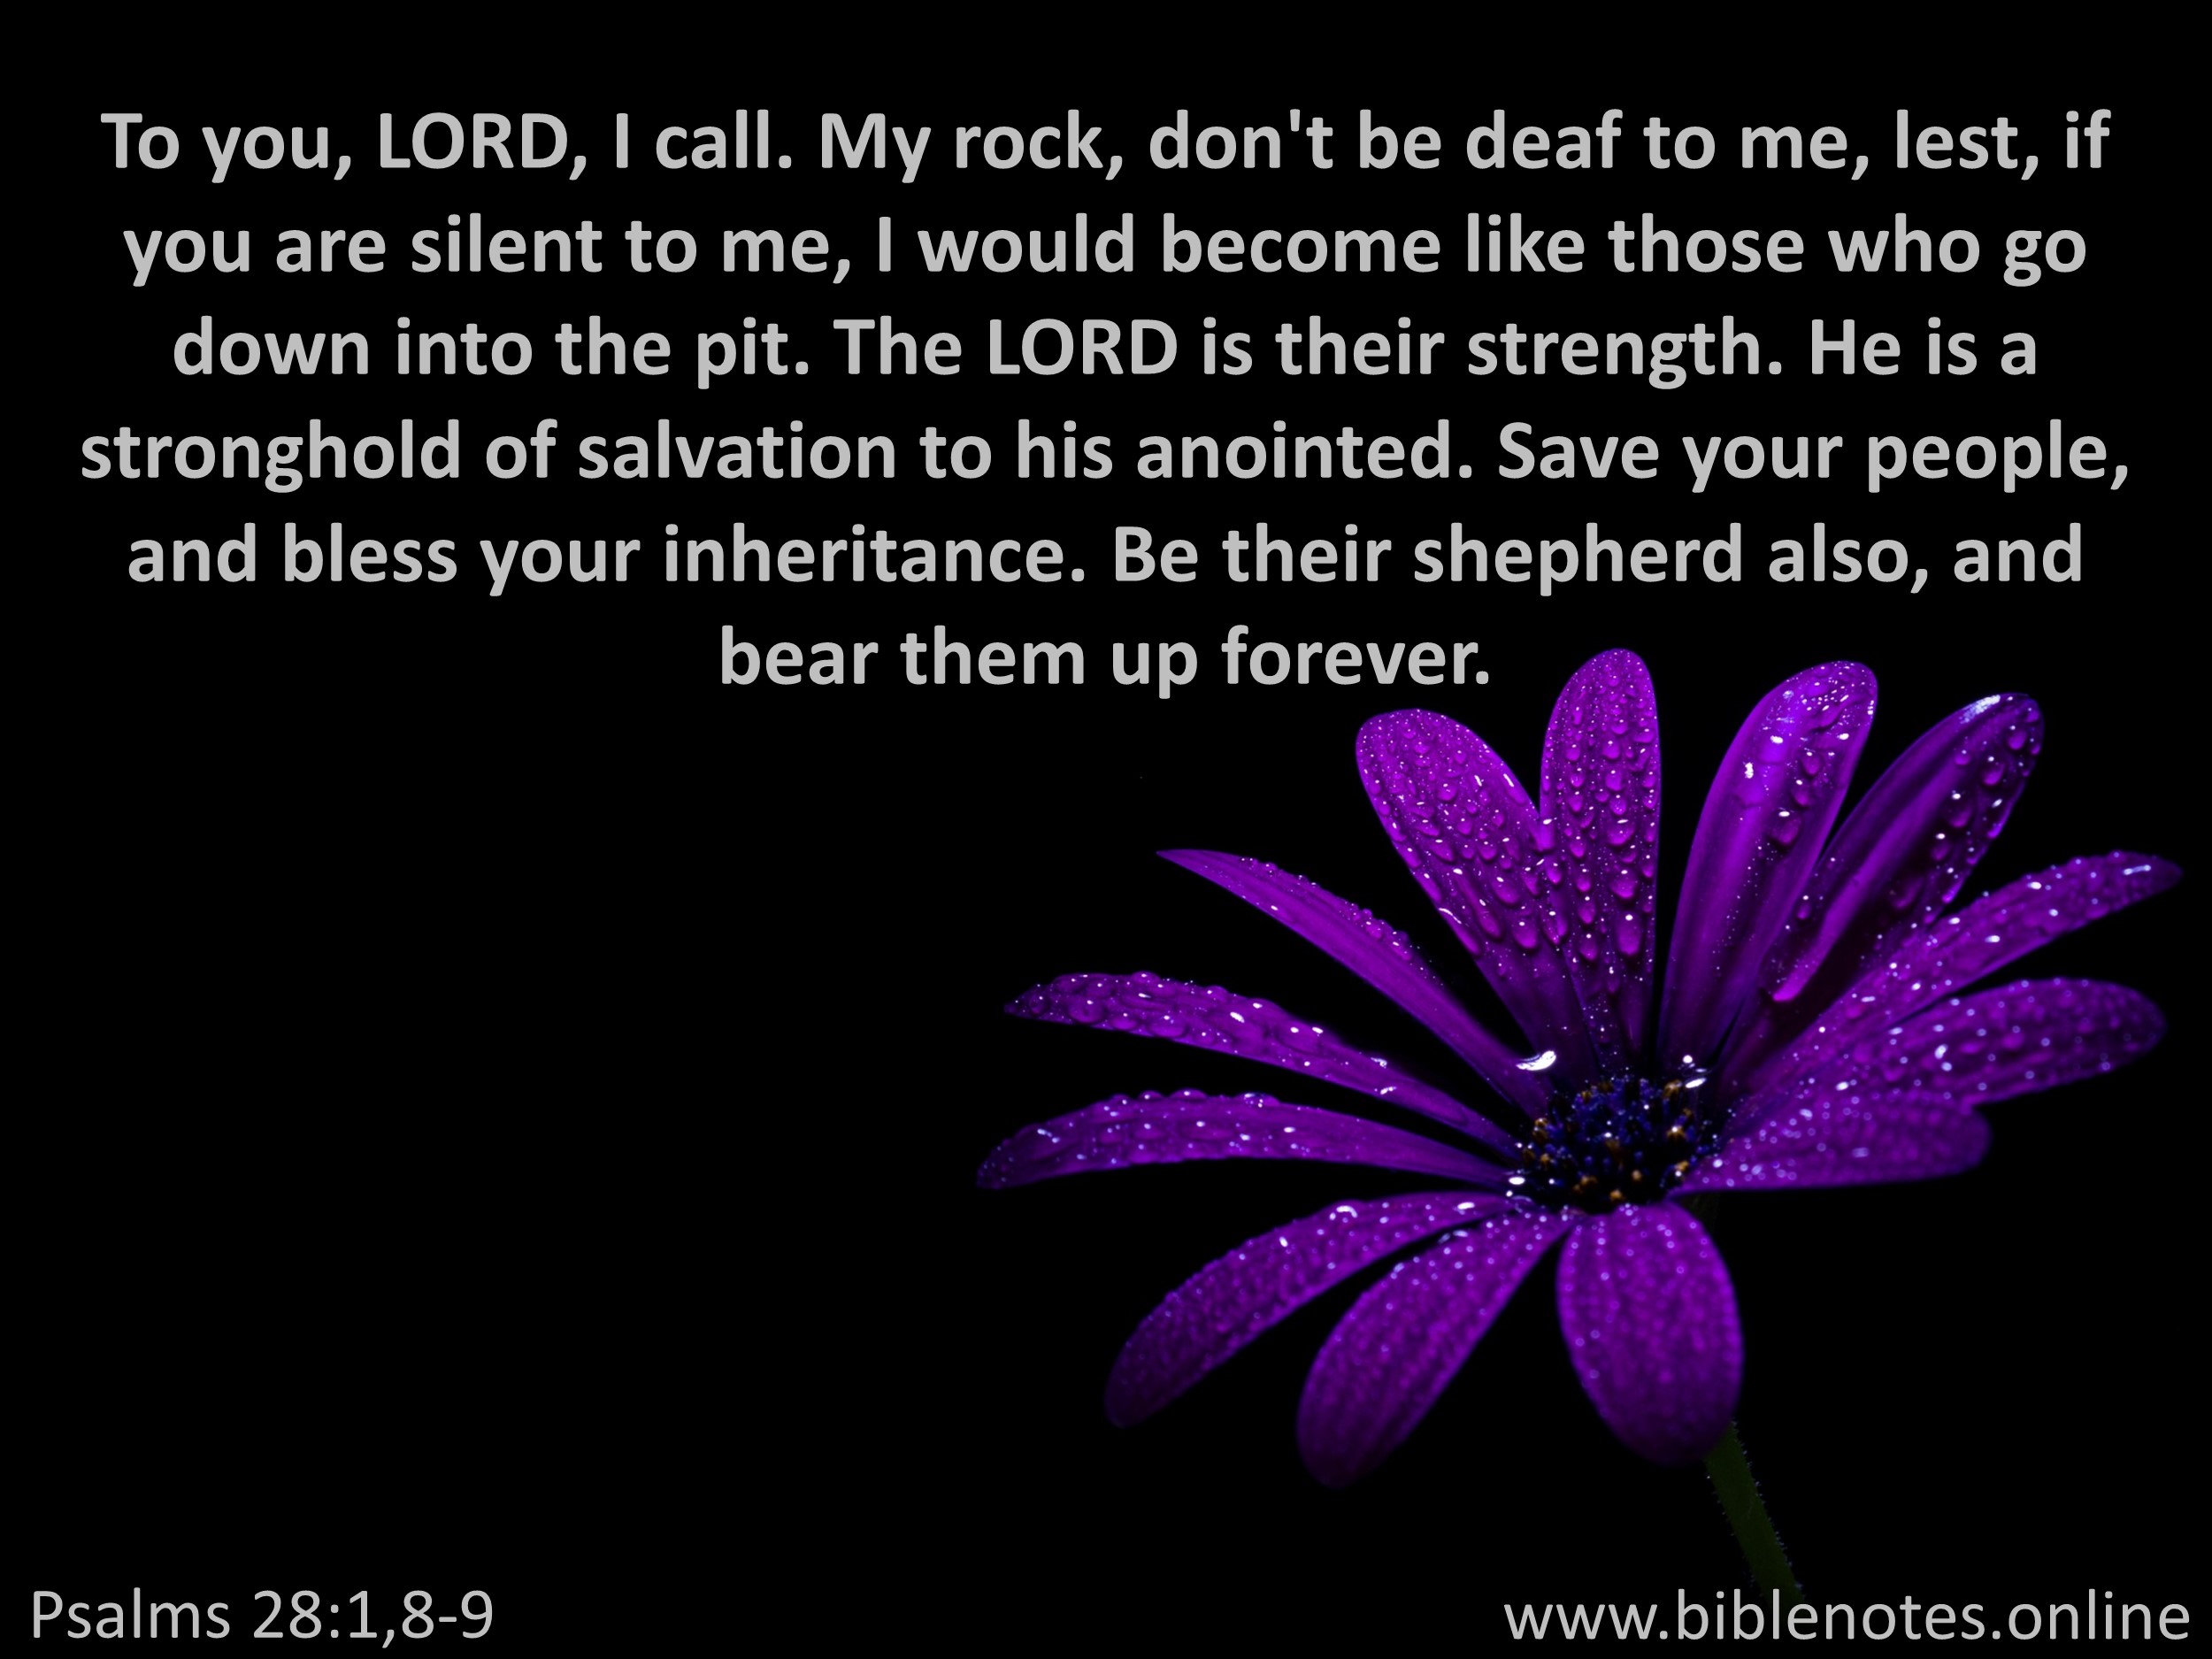 Bible Verse from Psalms Chapter 28